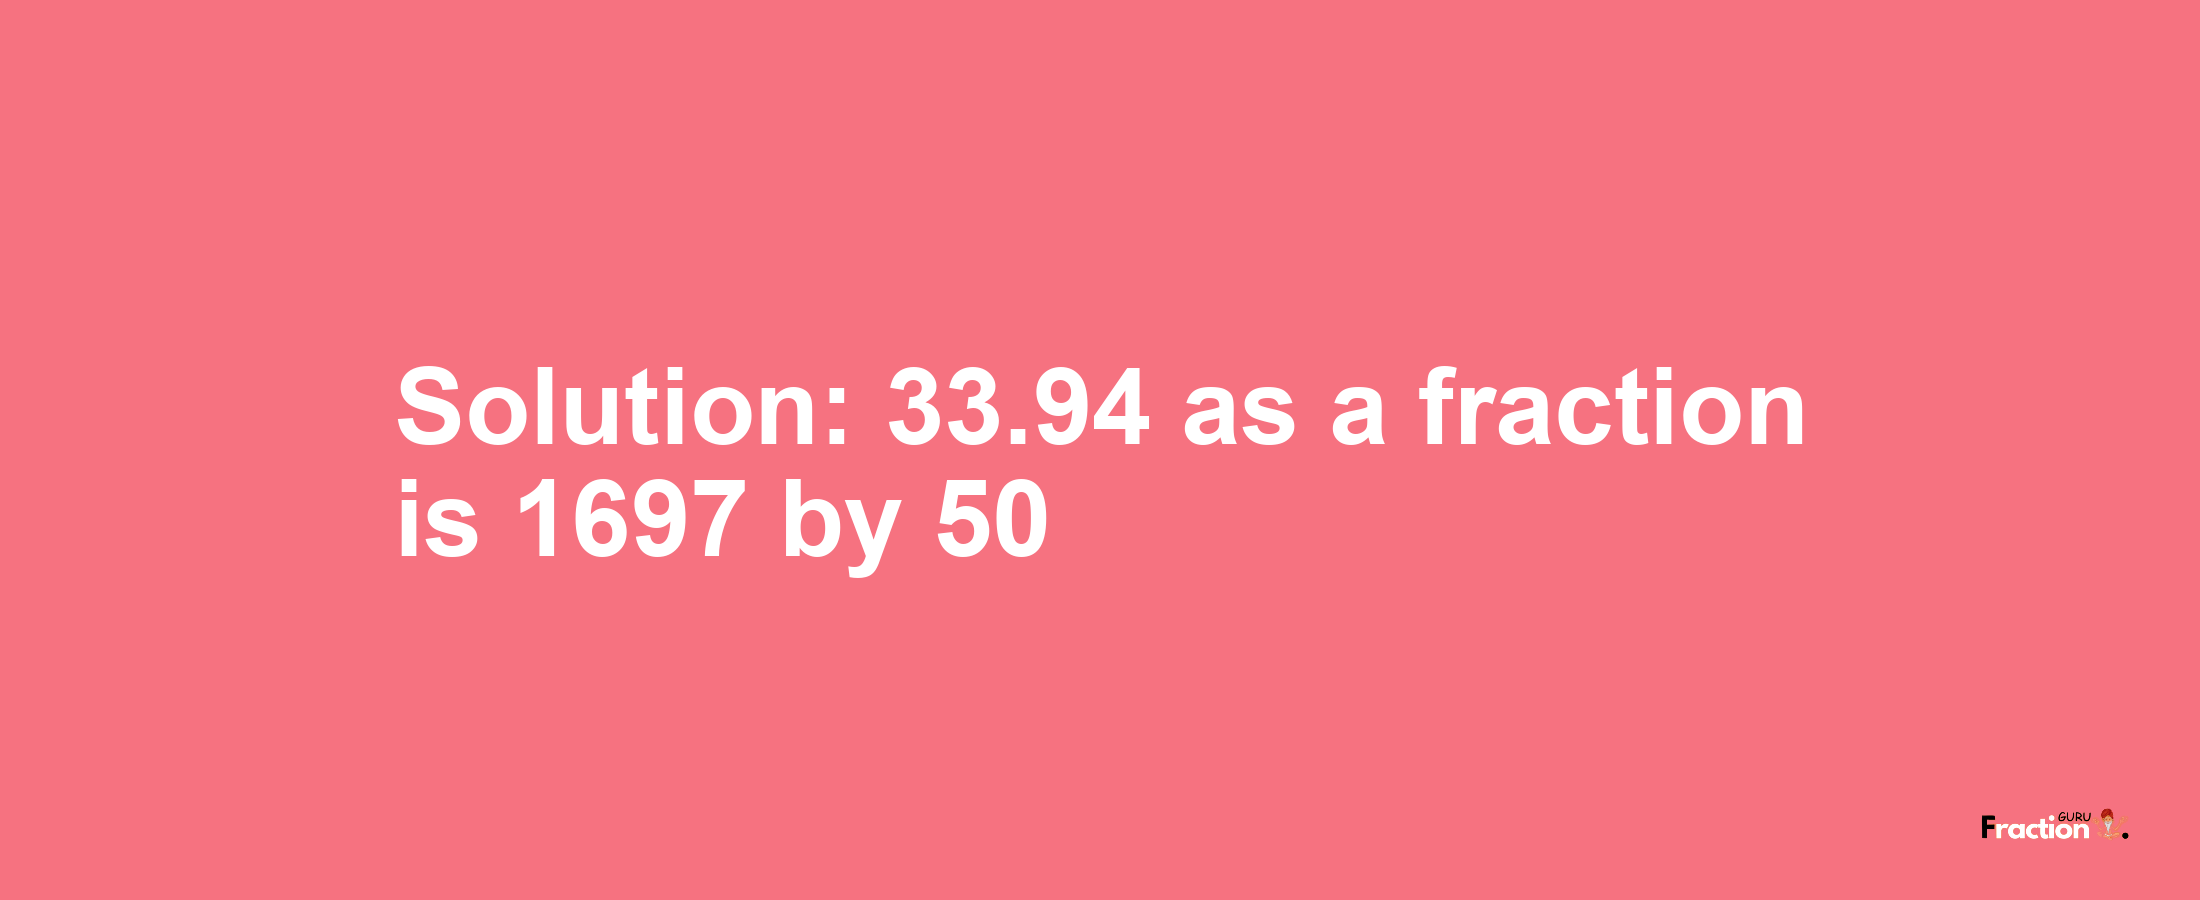 Solution:33.94 as a fraction is 1697/50